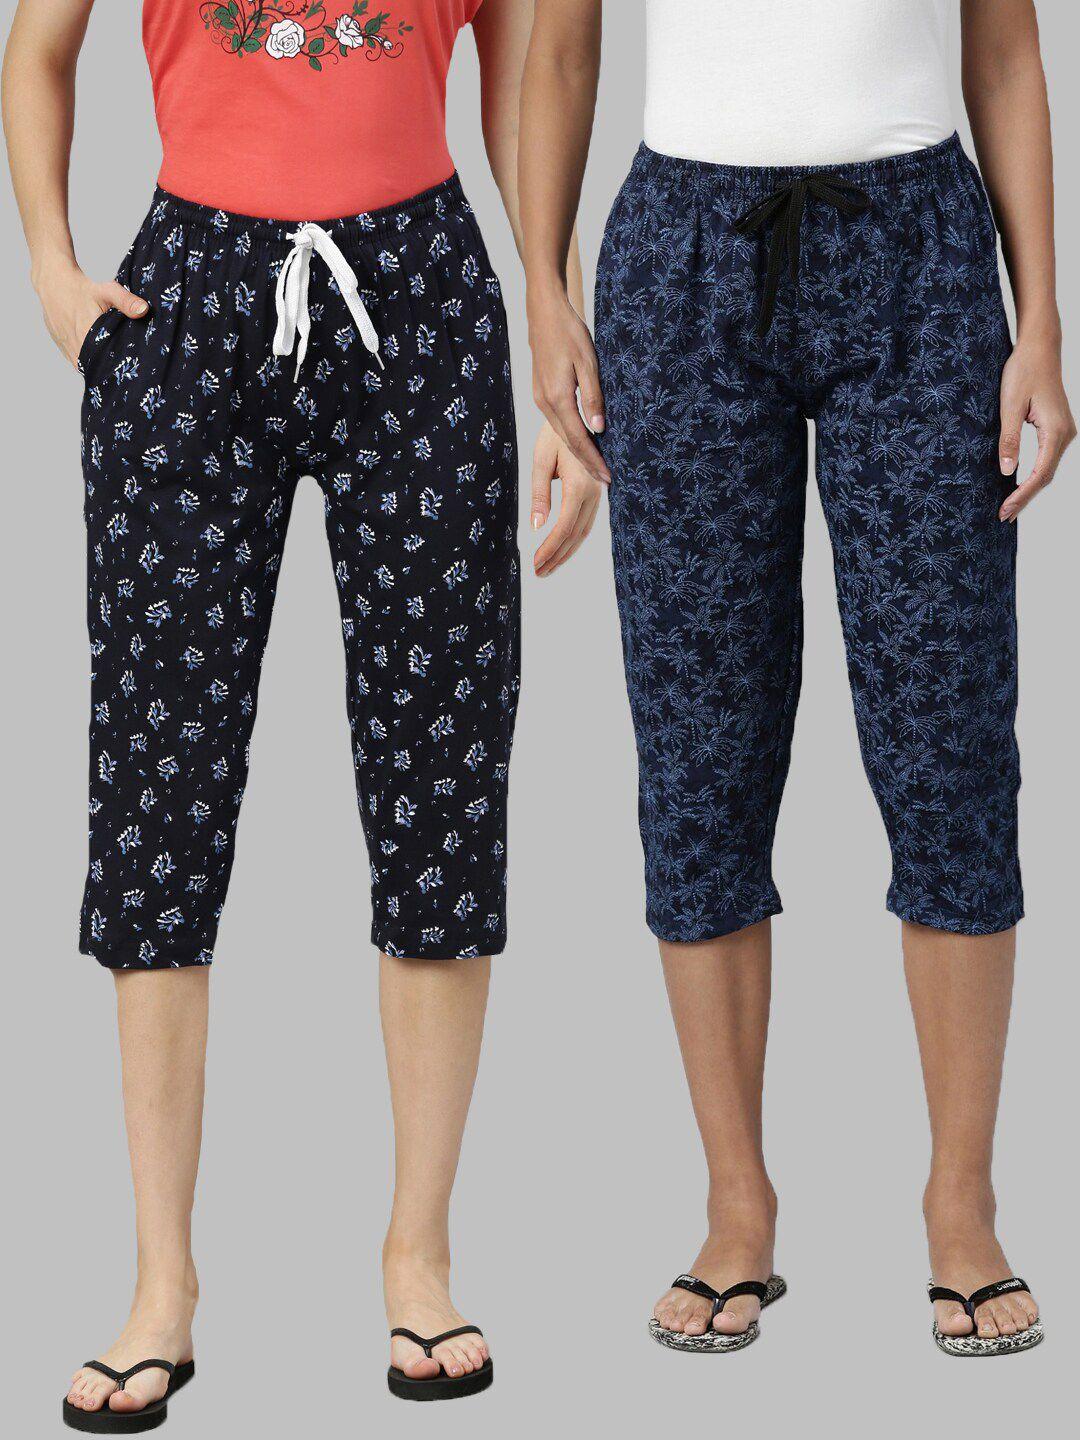 kryptic women pack of 2 navy blue printed pure cotton capris